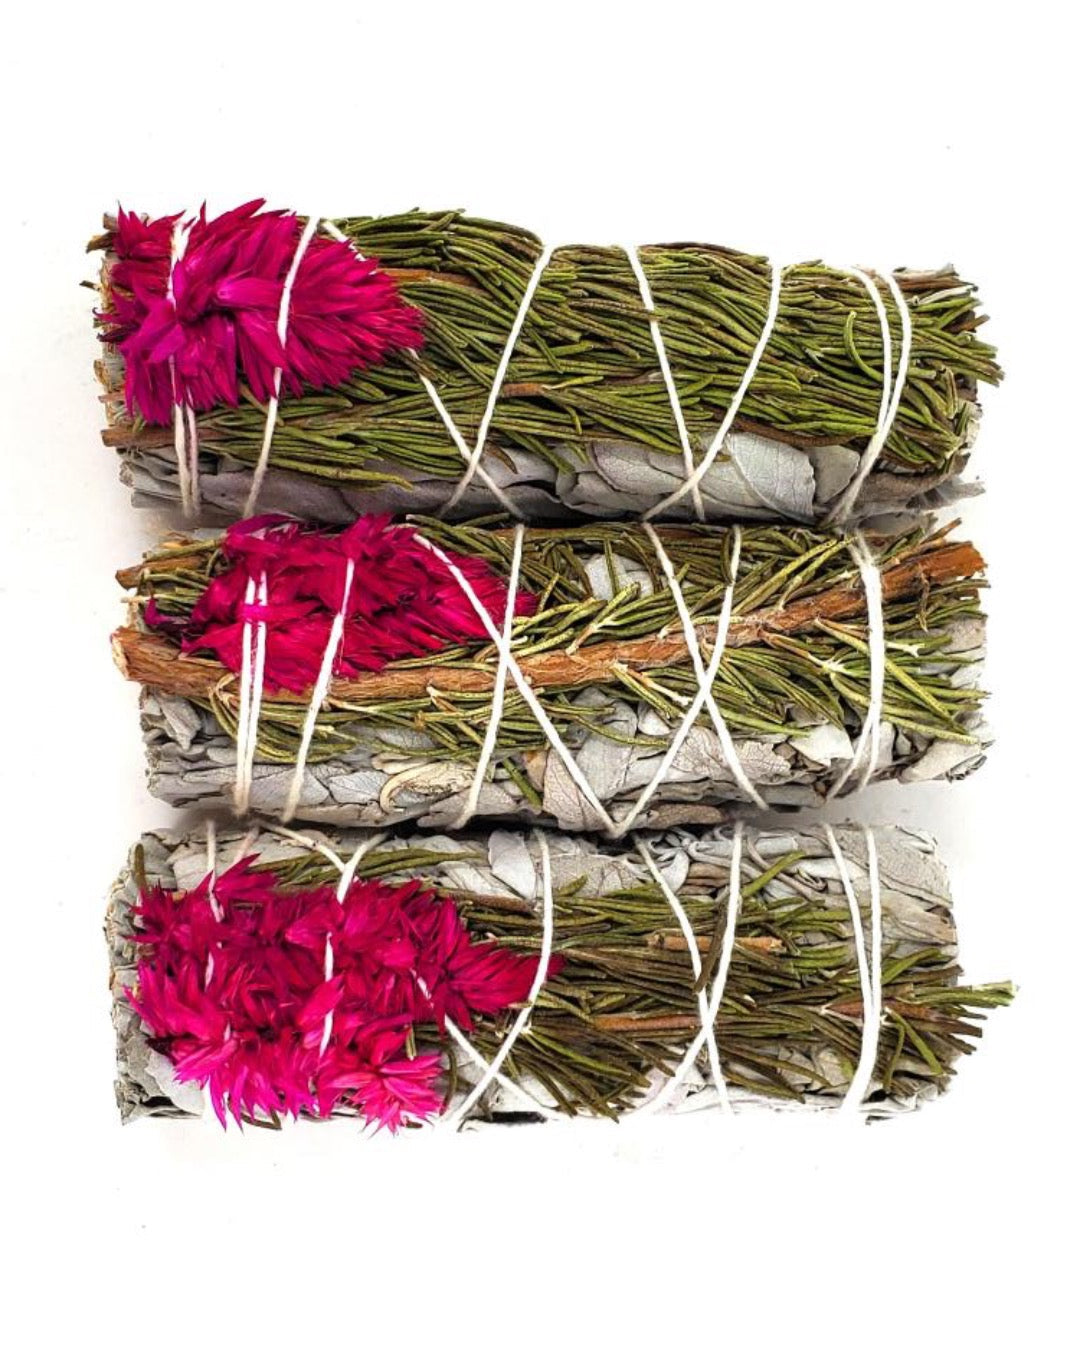 White Sage, Rosemary + Dried Celosia Flower Smudge - Crystals Shop, Gems + Wholesale Sage by Liv Rocks